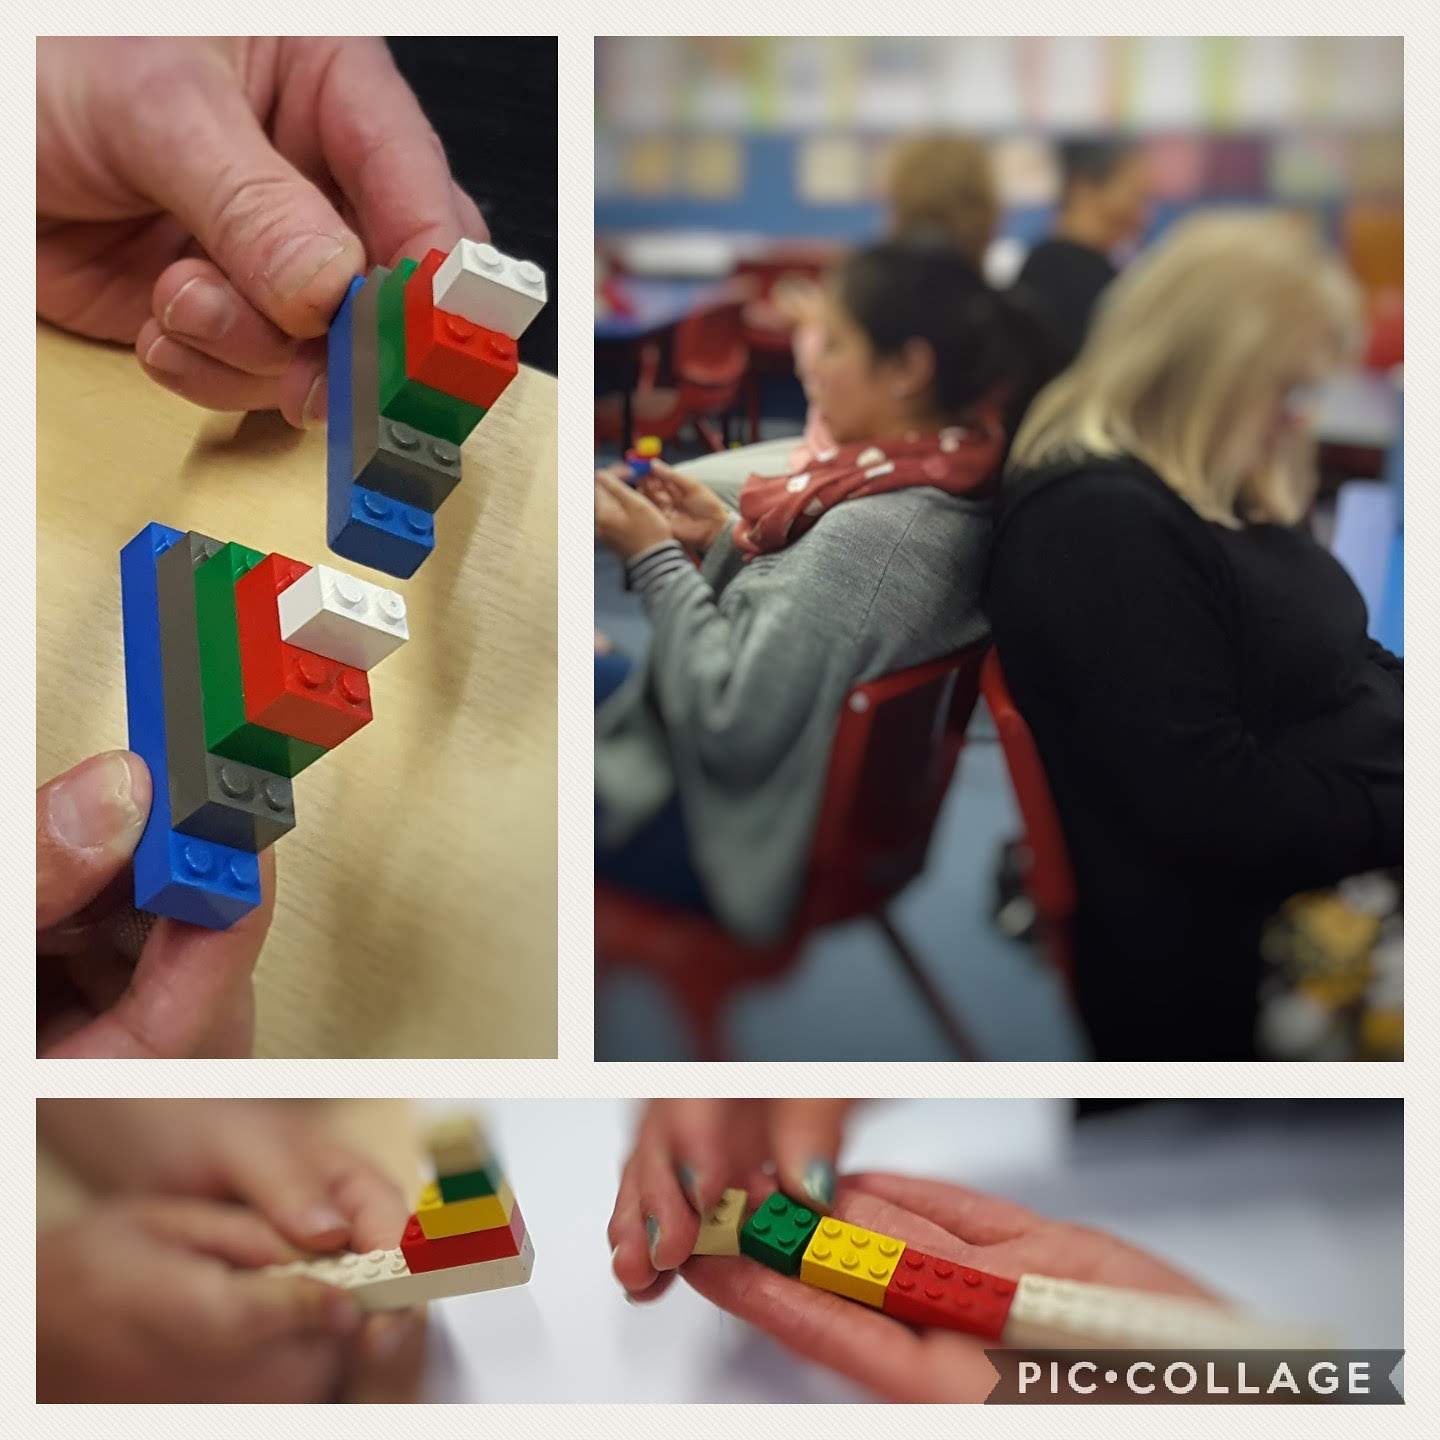 three images showing two people sitting back to back making a model with lego pieces. one image shows two models the same, the other shows two completely different models